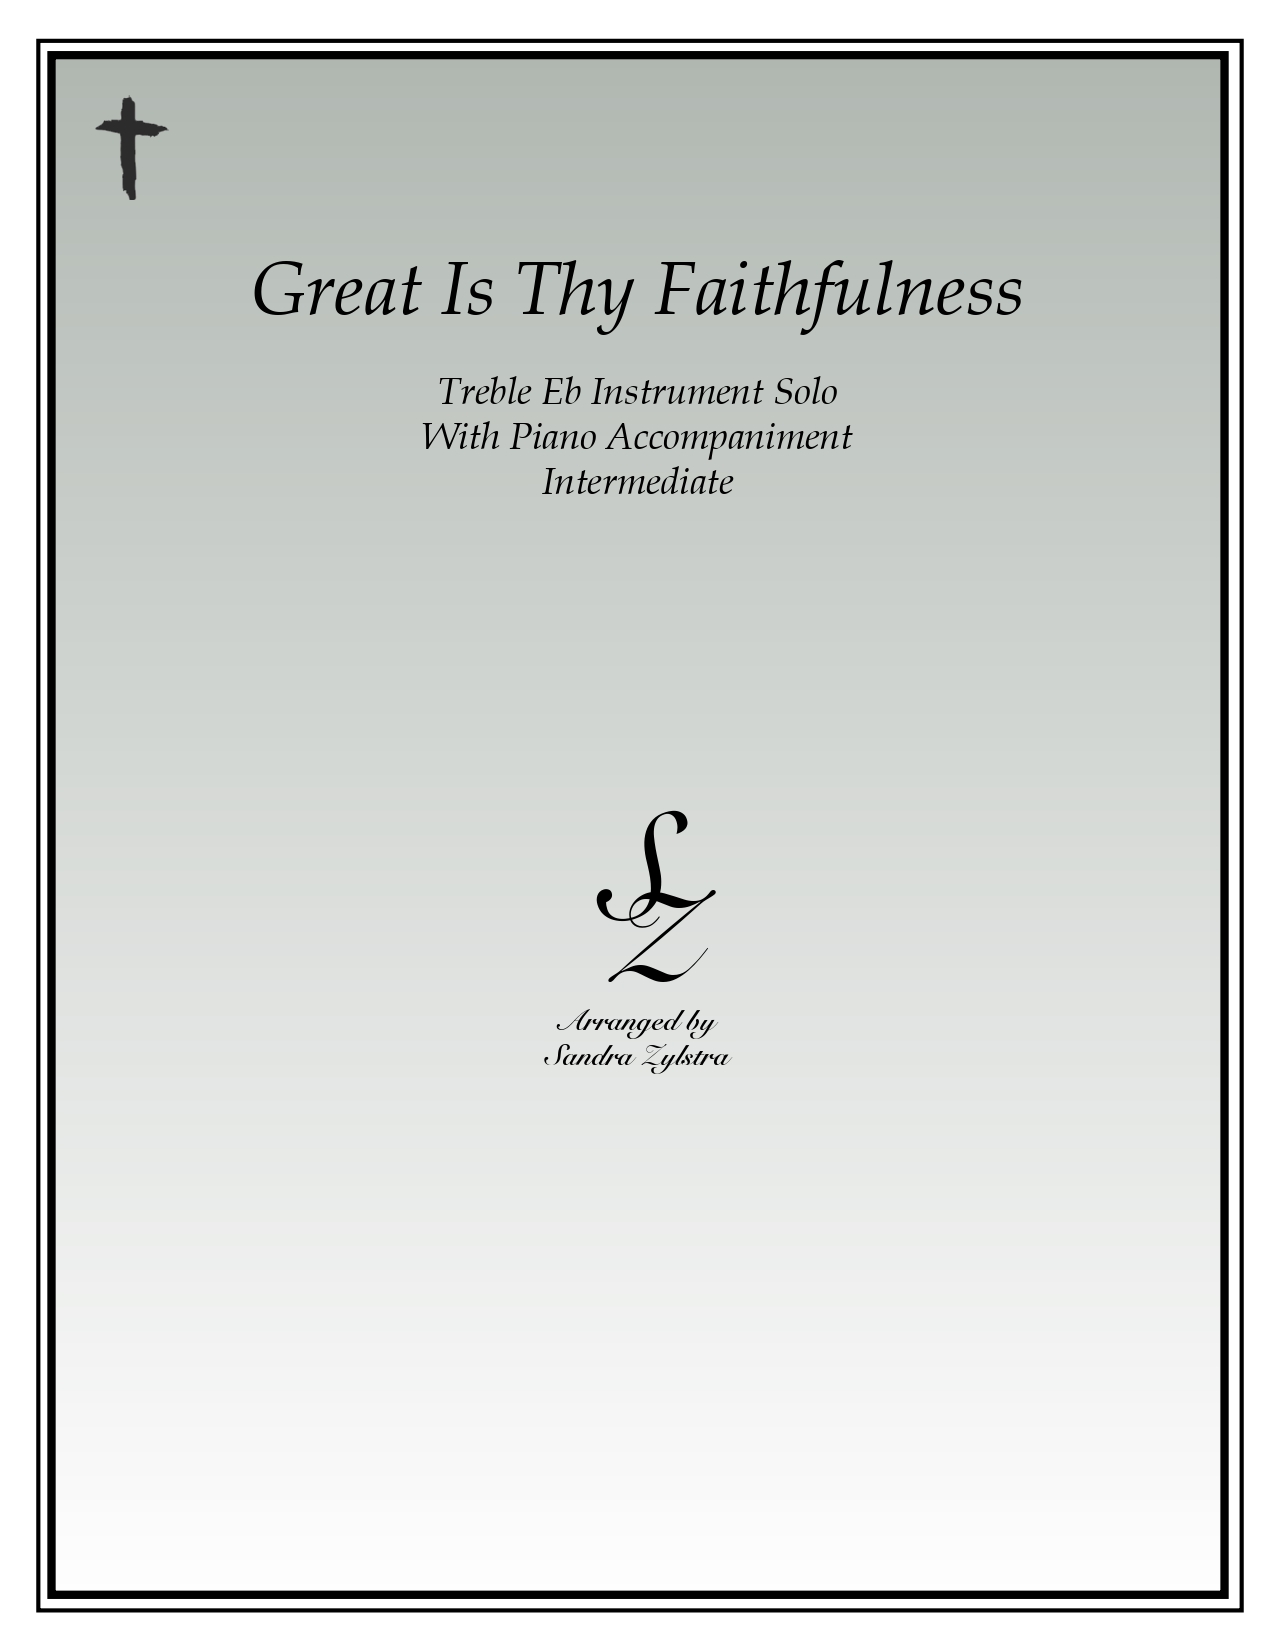 Great Is Thy Faithfulness Eb instrument solo part cover page 00011